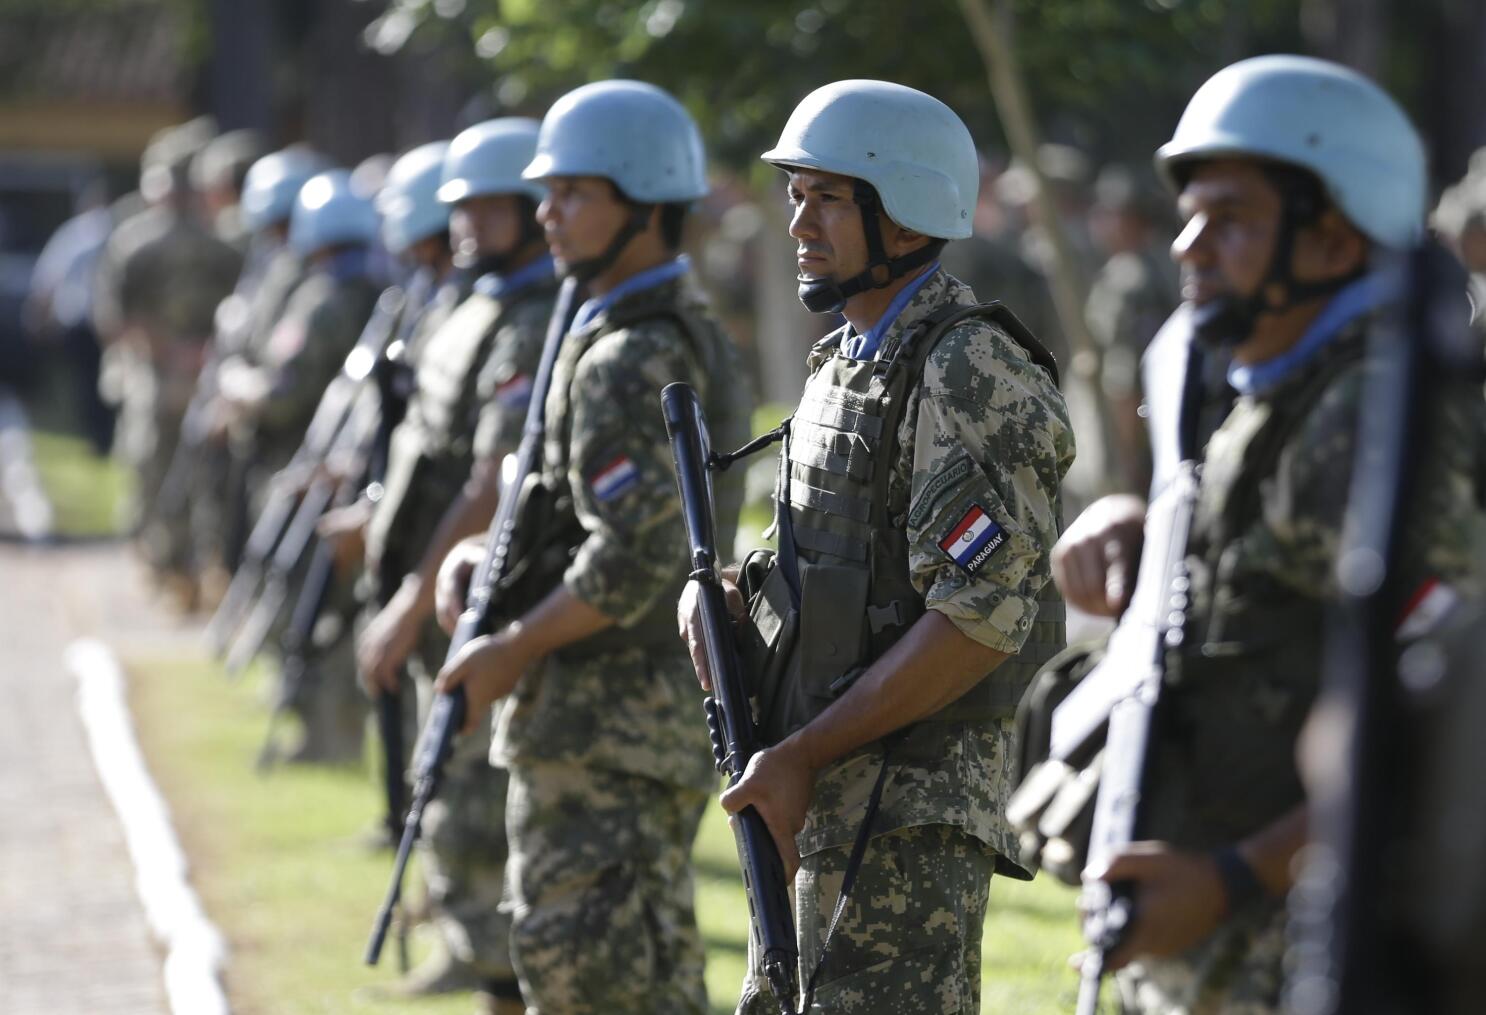 UN peacekeeping on 75th anniversary: successes, failures and